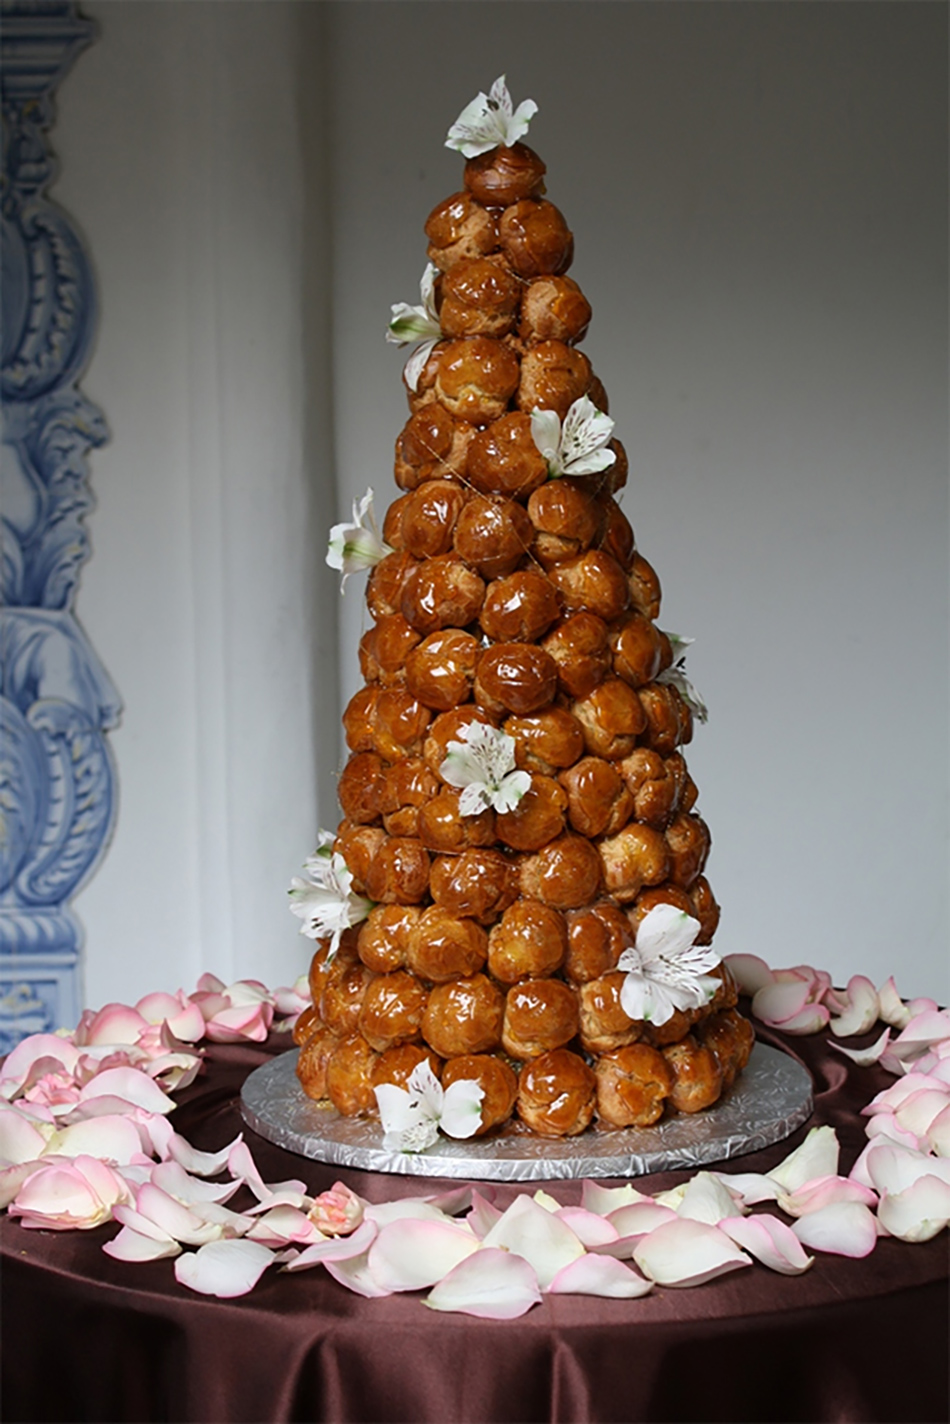 All hail the pudding wedding cake